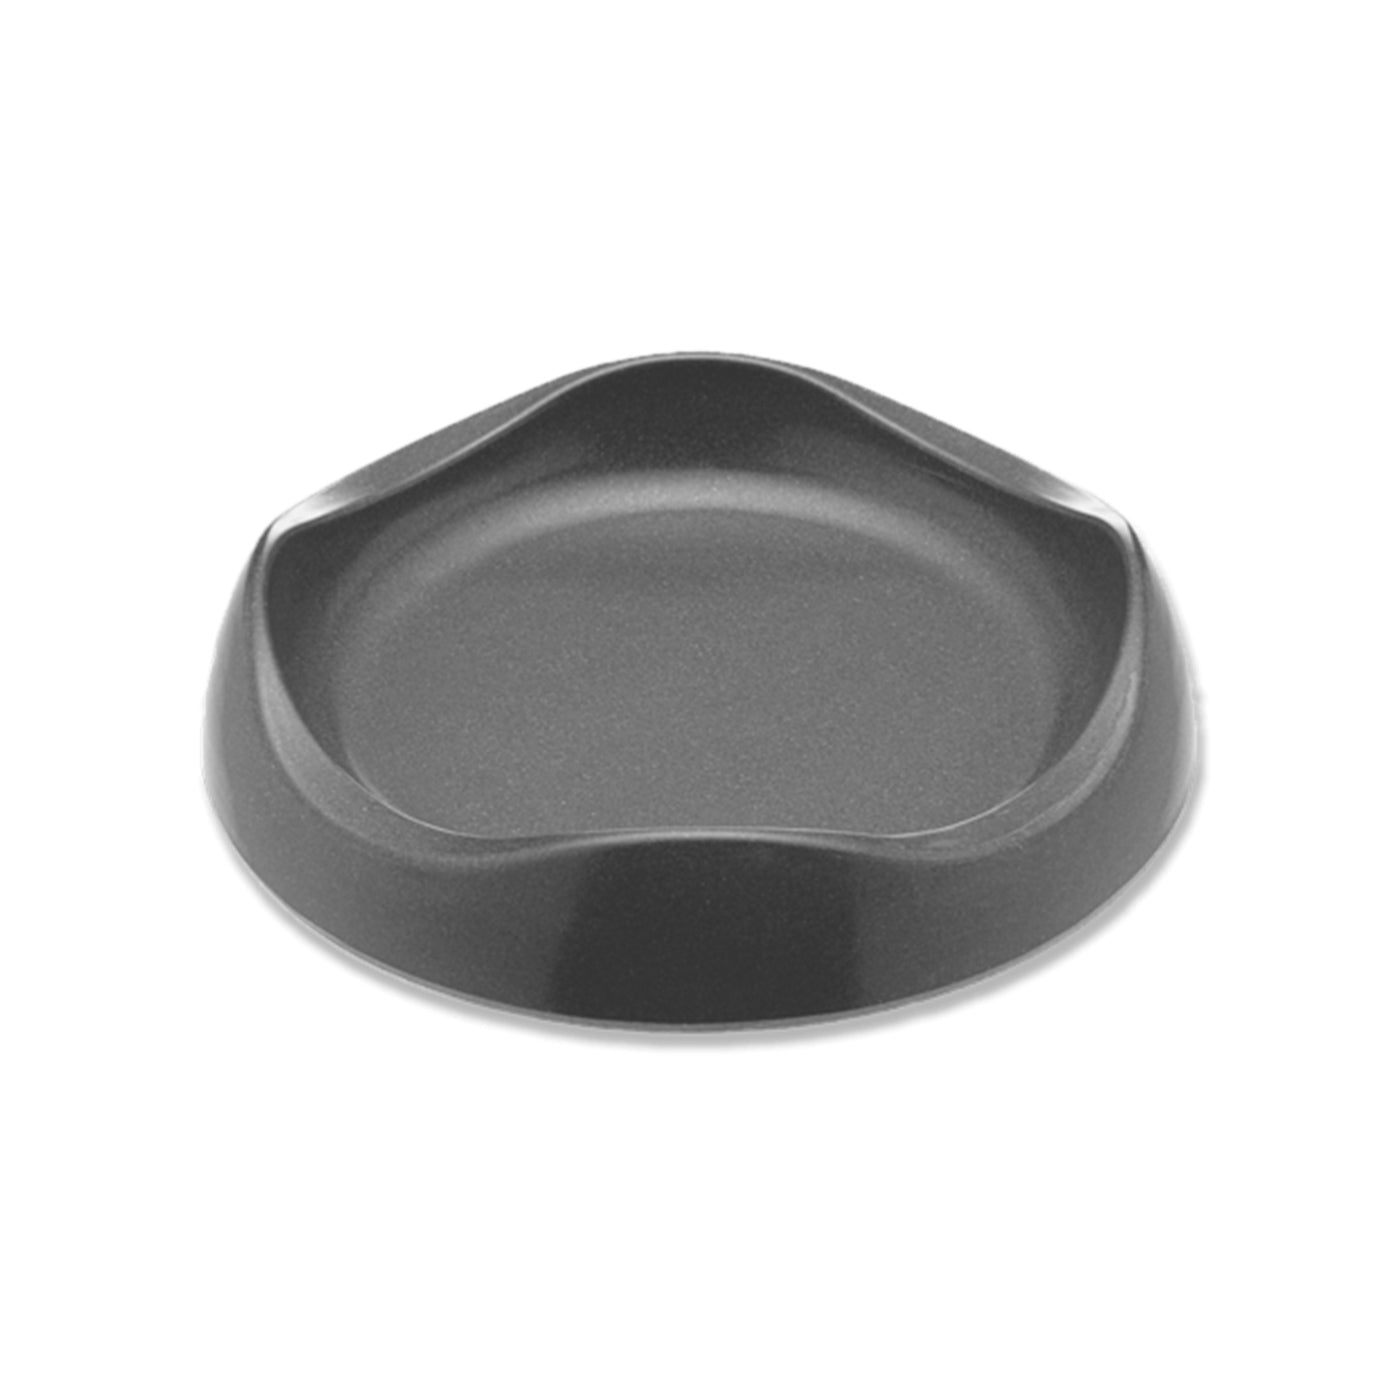 Beco bamboo cat bowl in charcoal on white background [color:charcoal]